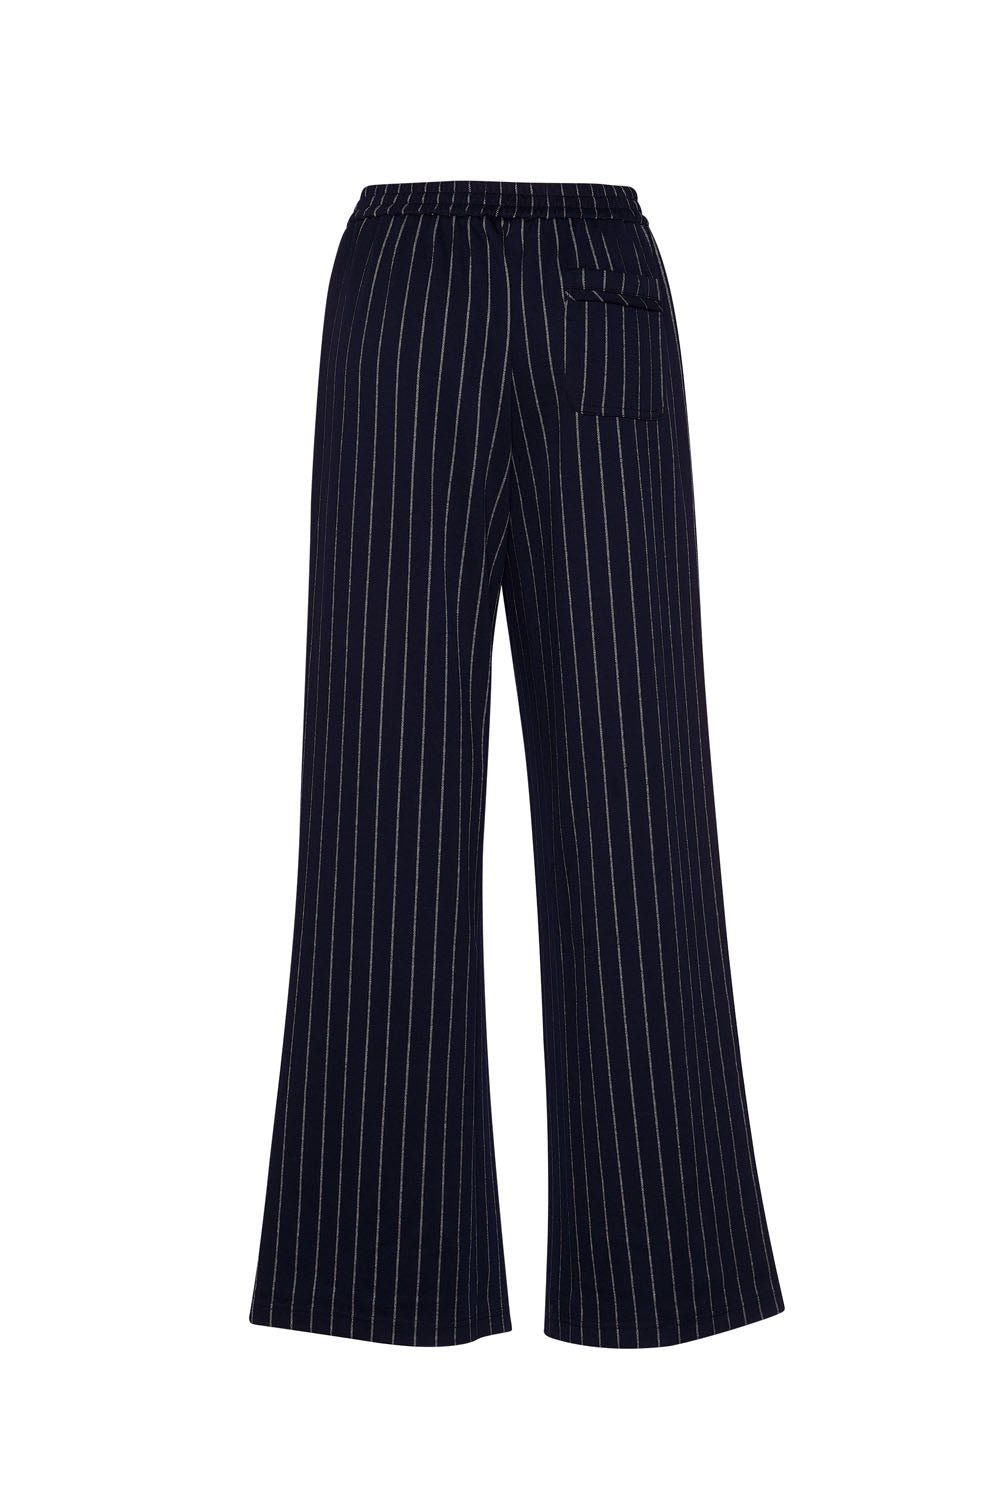 Shop Capone Pant | Navy Stripe - Madly Sweetly